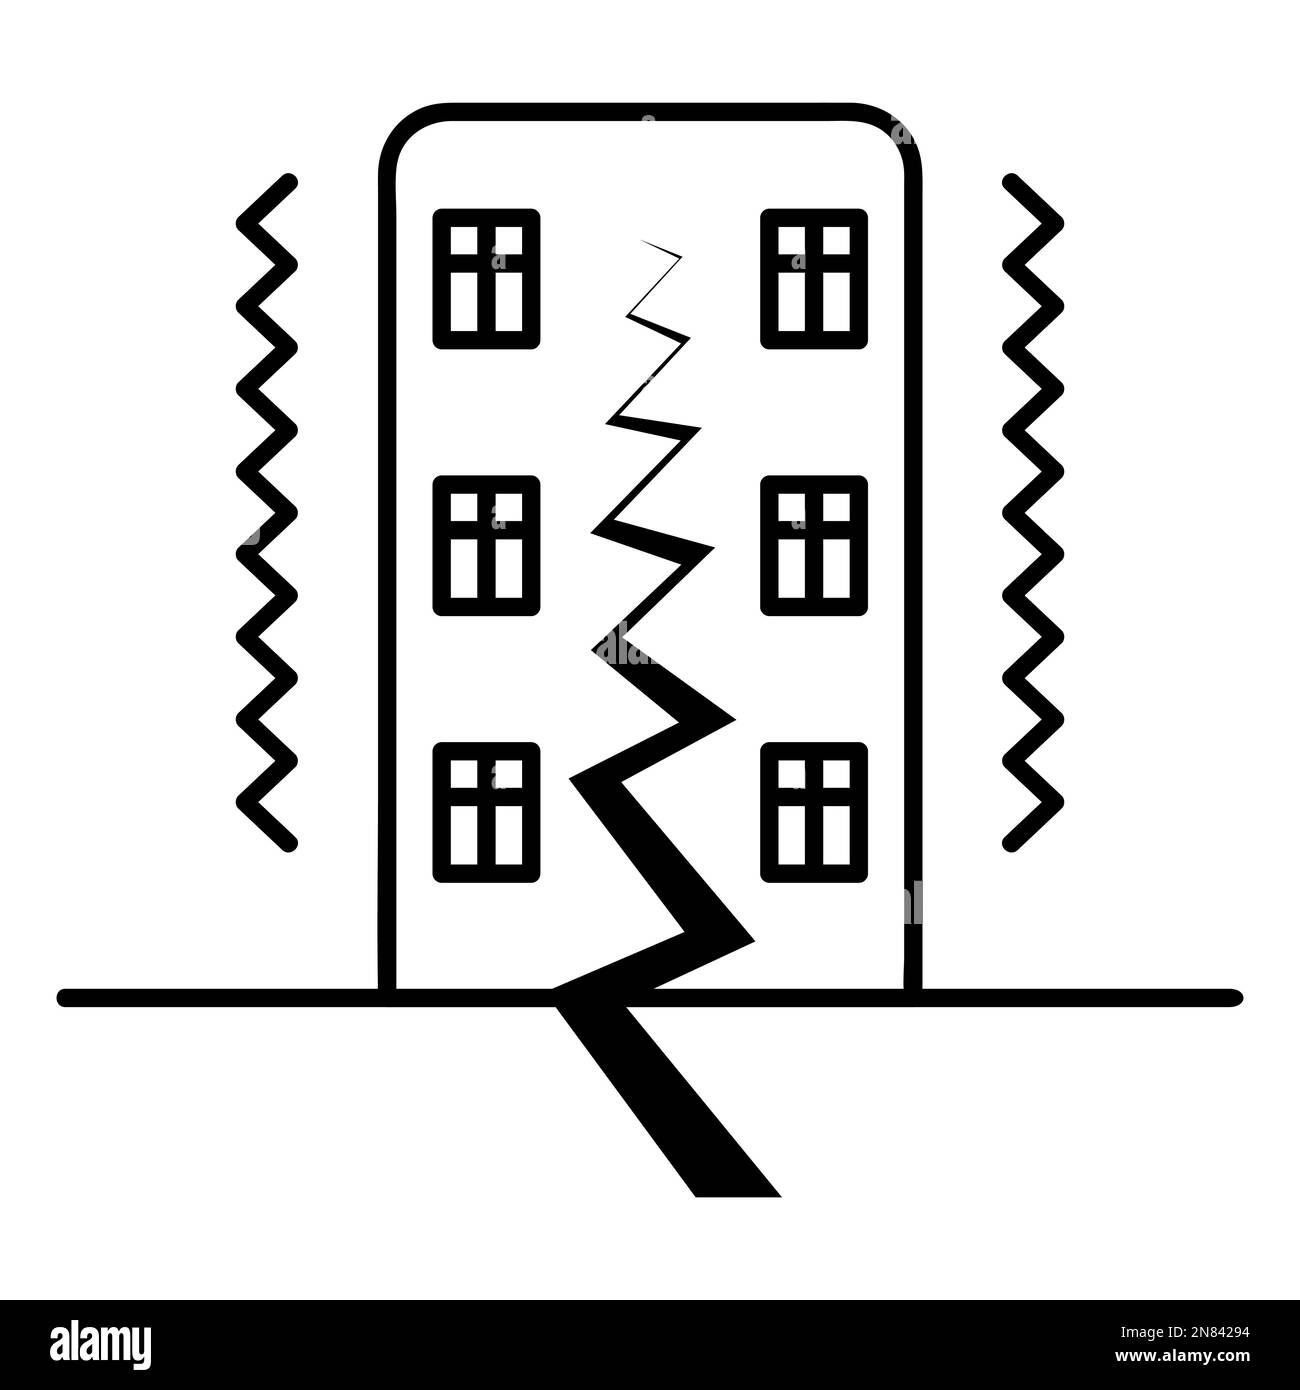 Earthquake. The apartment building is shaking. There is a crack in the wall of the house. Sketch. Zigzag crack. Vector illustration. Stock Vector